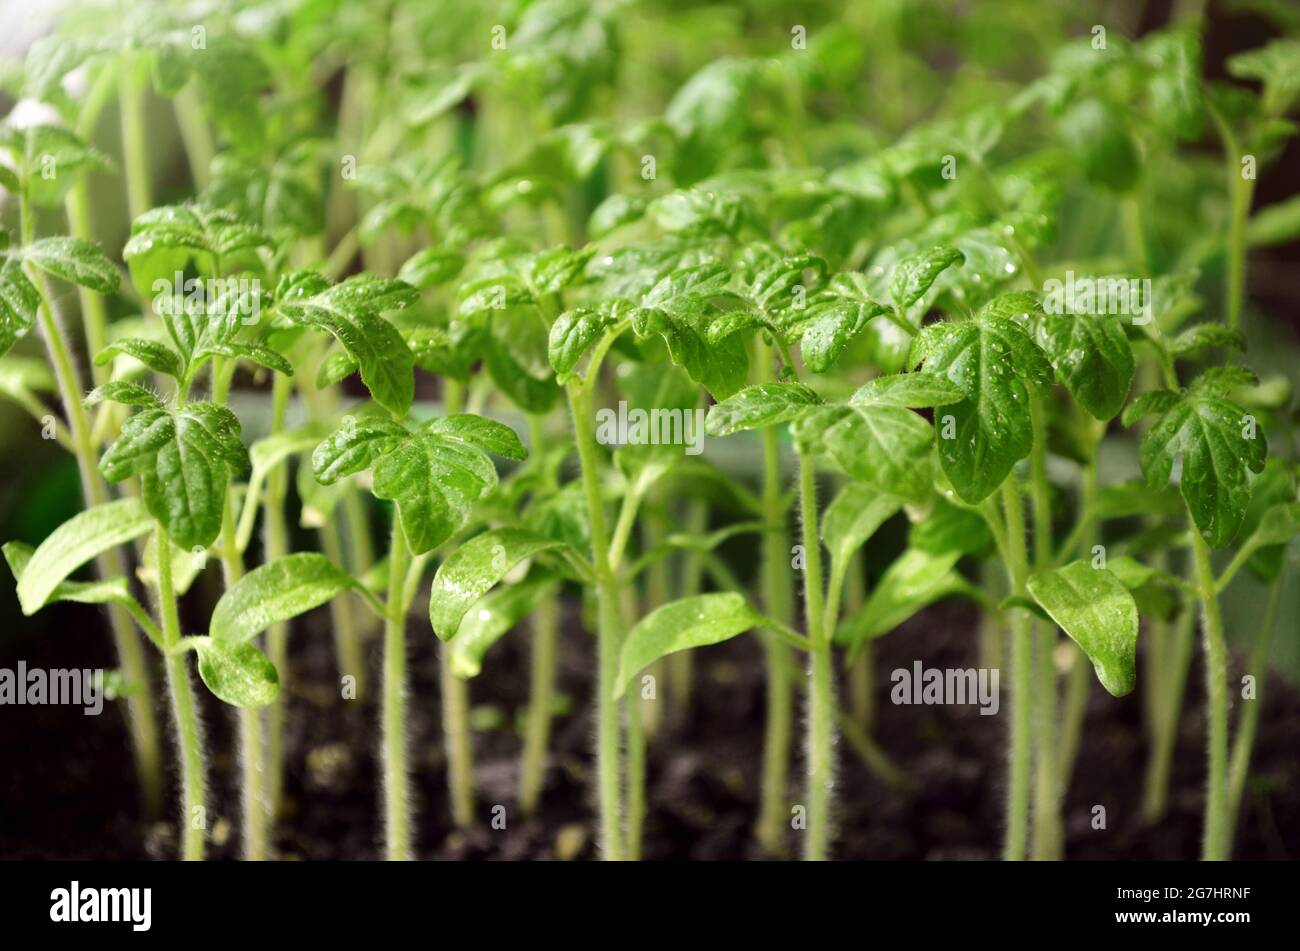 Close-up green tomato seedlings growing in the cultivation tray. Selective focus. Concept of own organic gardening. Stock Photo